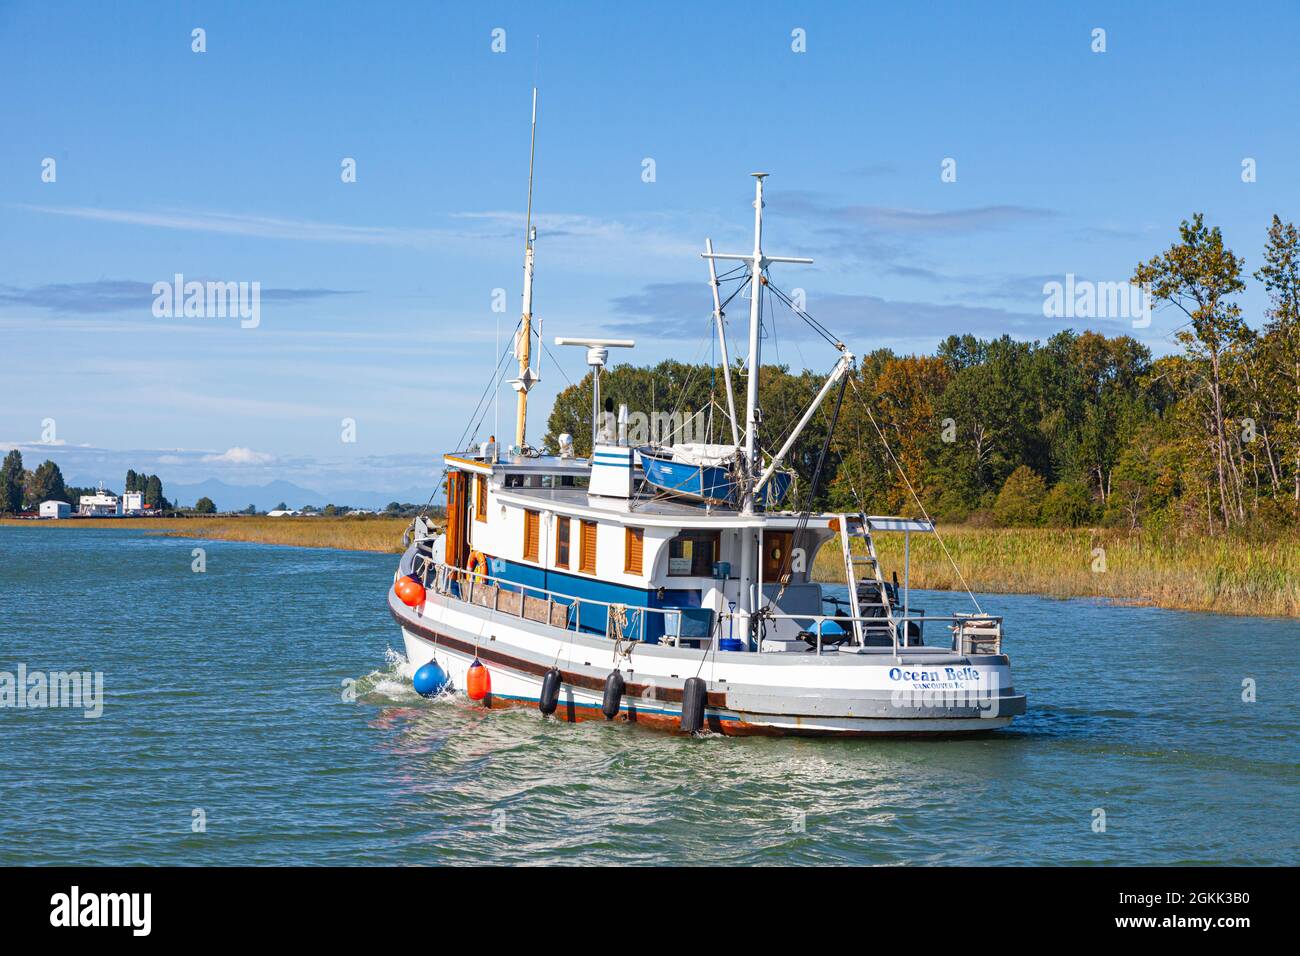 Pleasure craft cruising one of the channels of the Fraser River delta near Ladner British Columbia Canada Stock Photo